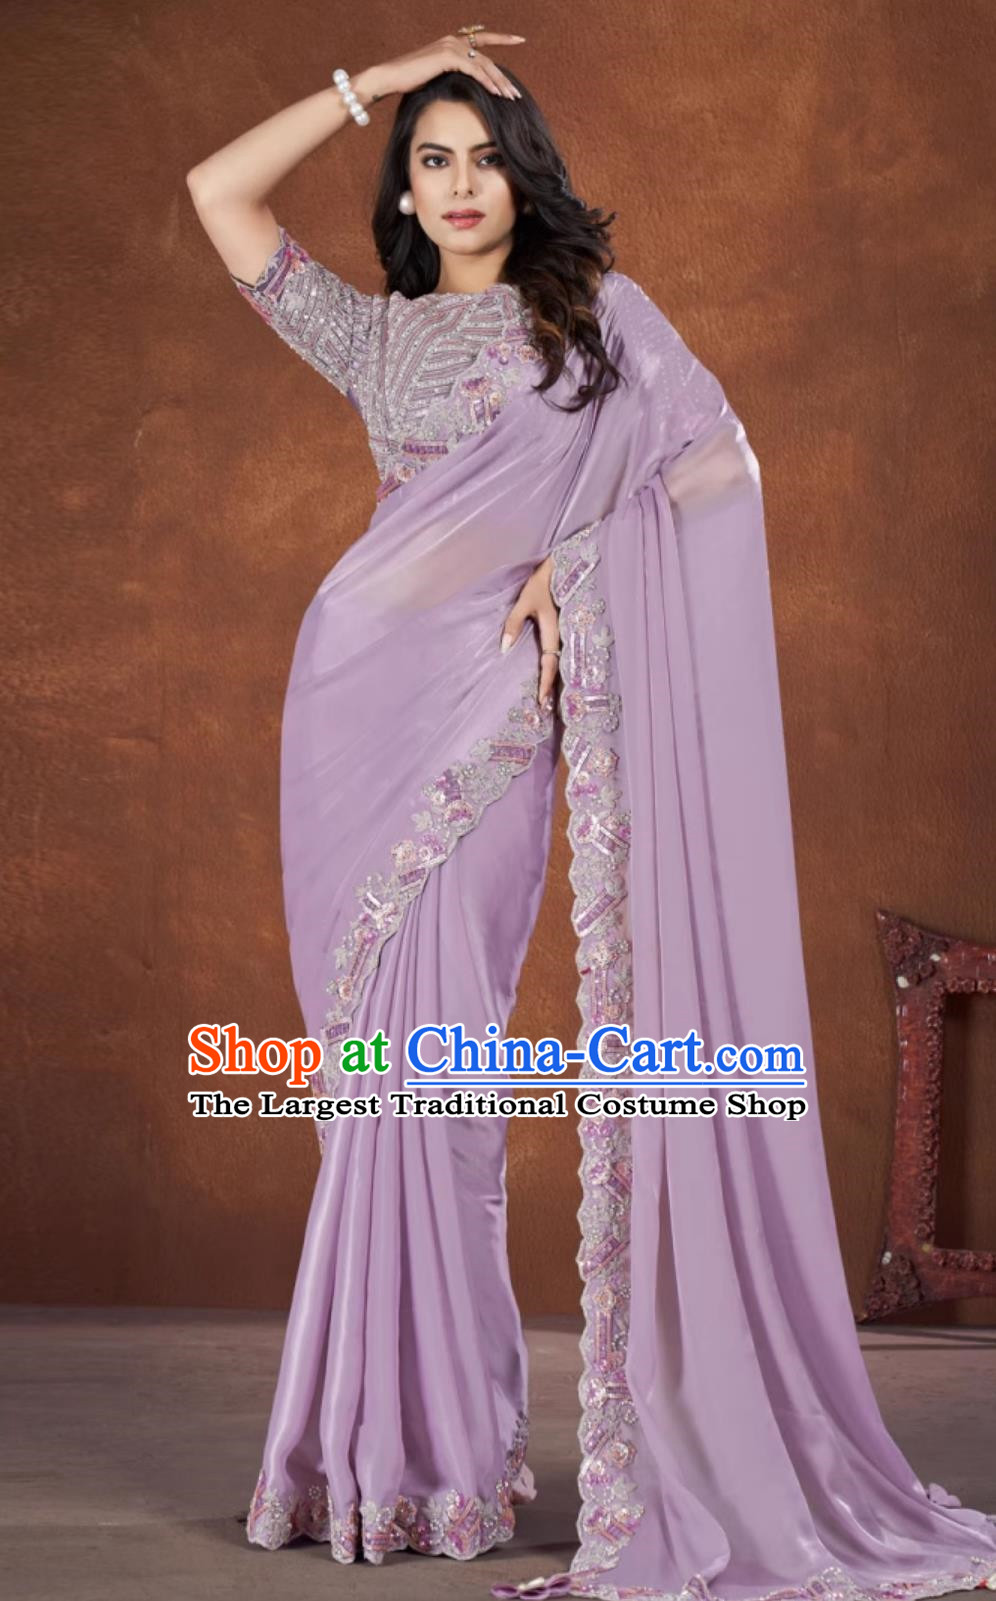 Light Purple Embroidered National Indian Saree With Diamonds Features Traditional Festival Party Women Wrap Skirt Sari